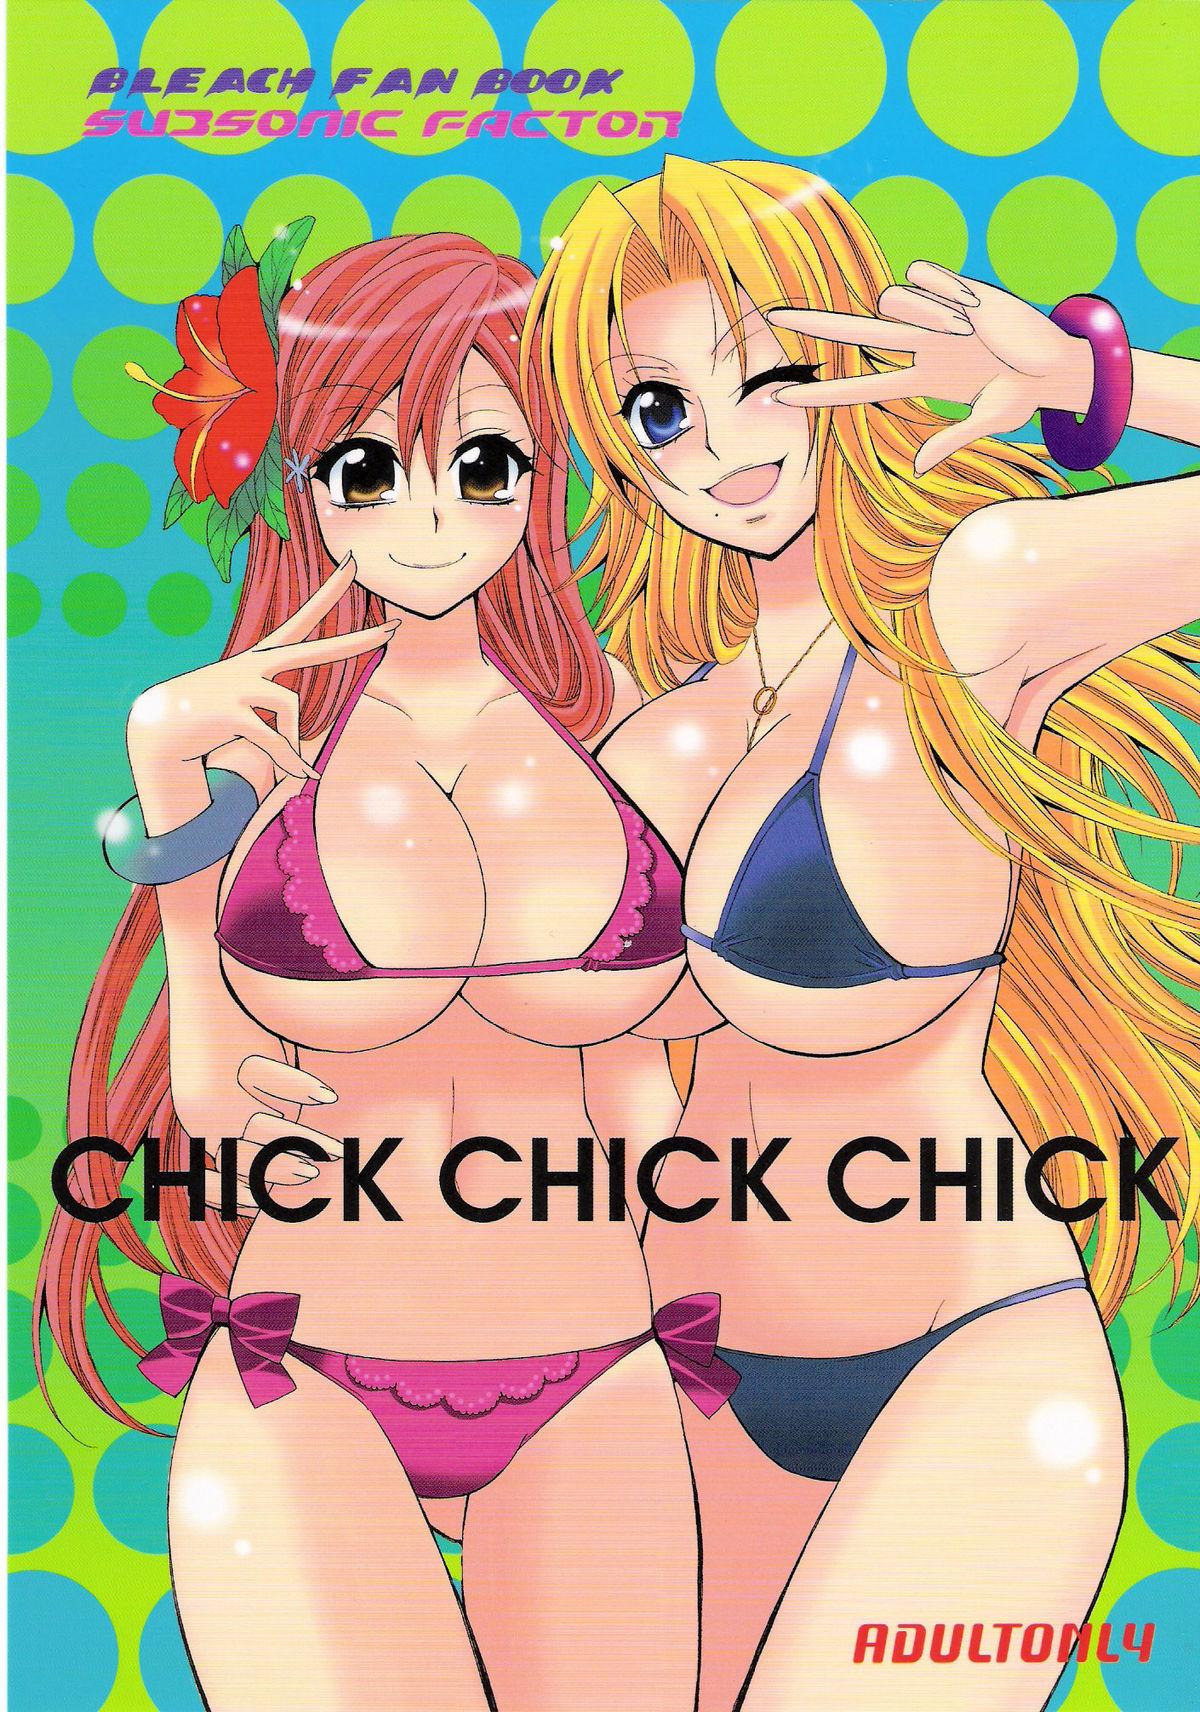 Cruising CHICK CHICK CHICK - Bleach Free - Page 1